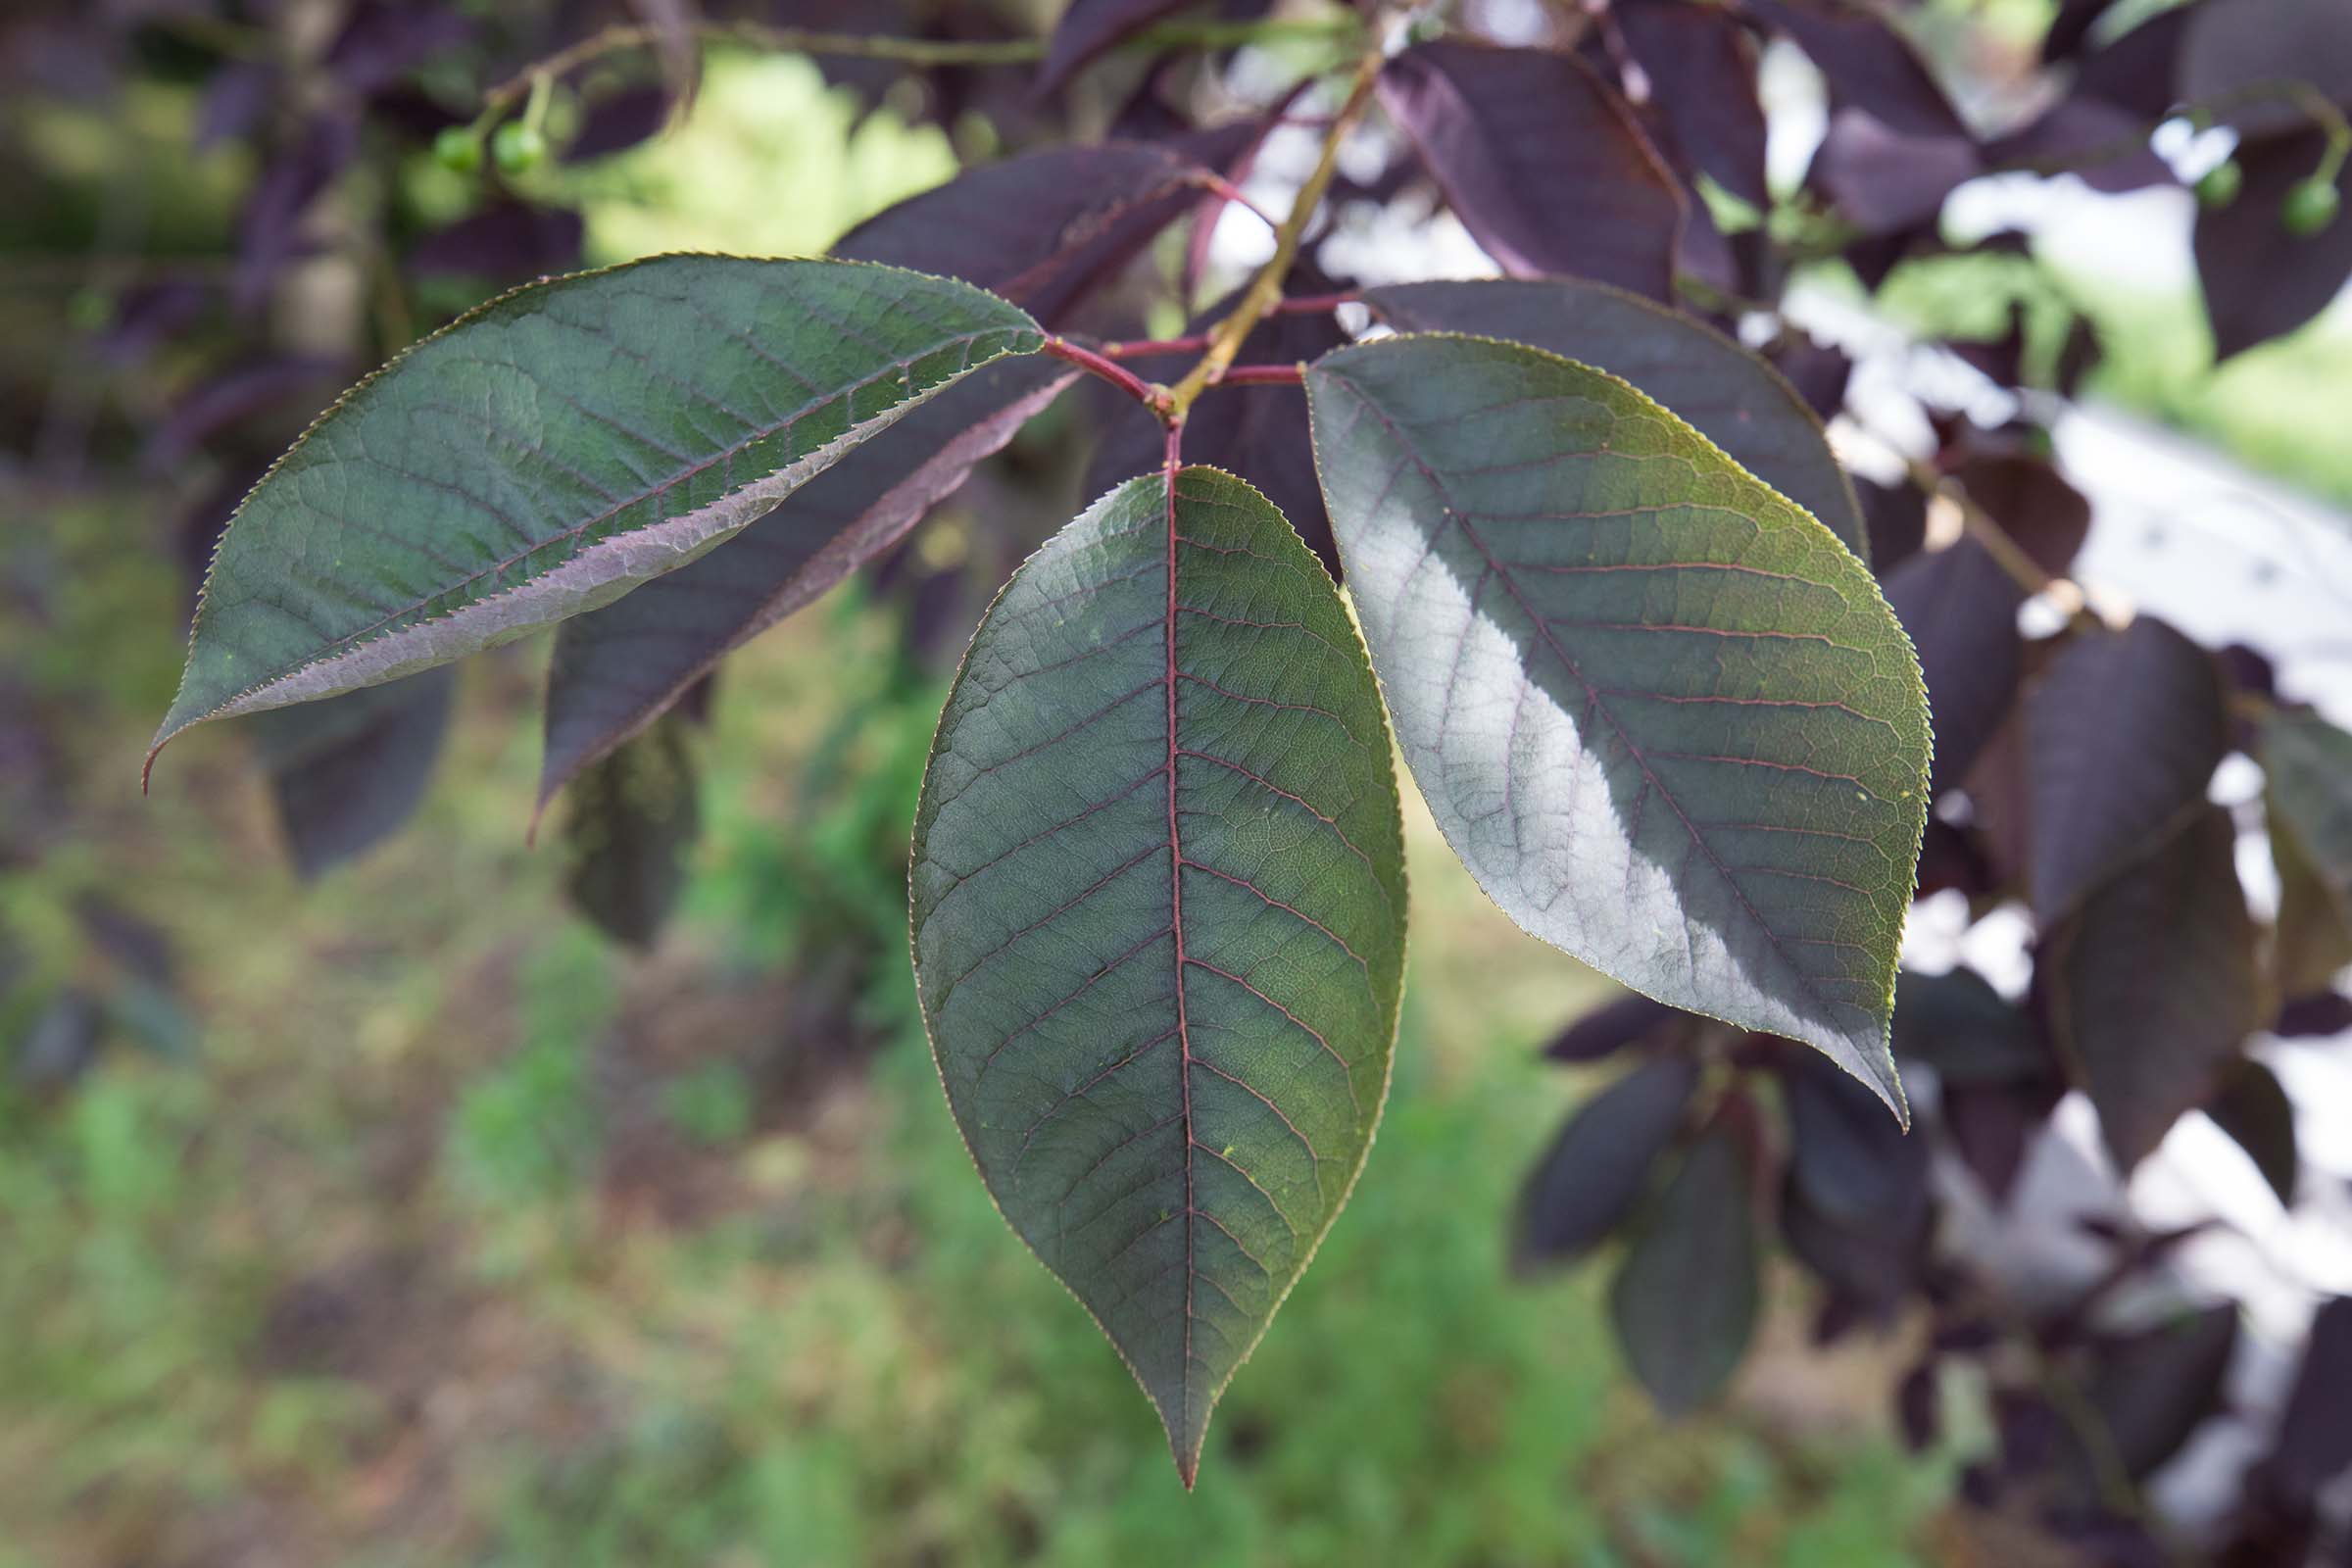 The leaves of the Canada Red Chokecherry tree are oval with a point at the top with red vein-like lines over the green